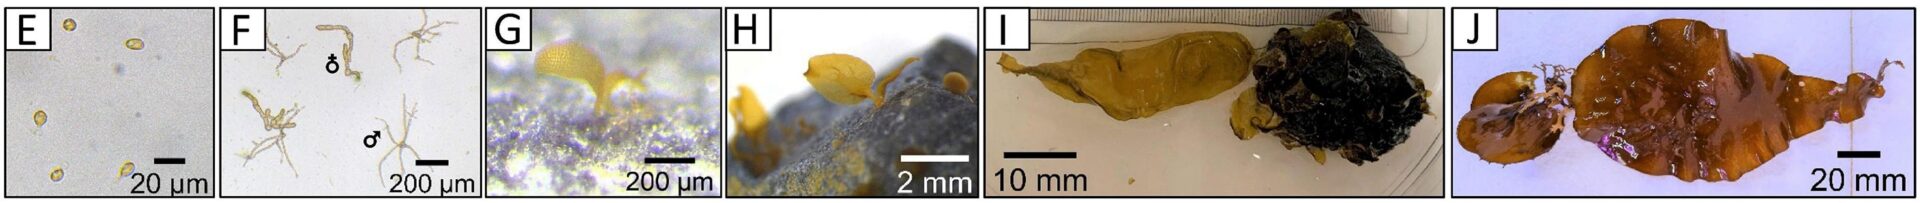 The green gravel kelp reproduction and maturation process. Incubated under red light, kelp gametophytes (second image) are then transferred to trays filled with gravel that they  attach to, developing further into small sporophytes (center images) that can then be released onto the ocean floor to continue growing. (Figure from “<a href="https://www.frontiersin.org/articles/10.3389/fmars.2022.910417">Green gravel as a vector of dispersal for kelp restoration</a>” by Alsuwaiyan NA, et al., <em>Frontiers in Marine Science</em>.